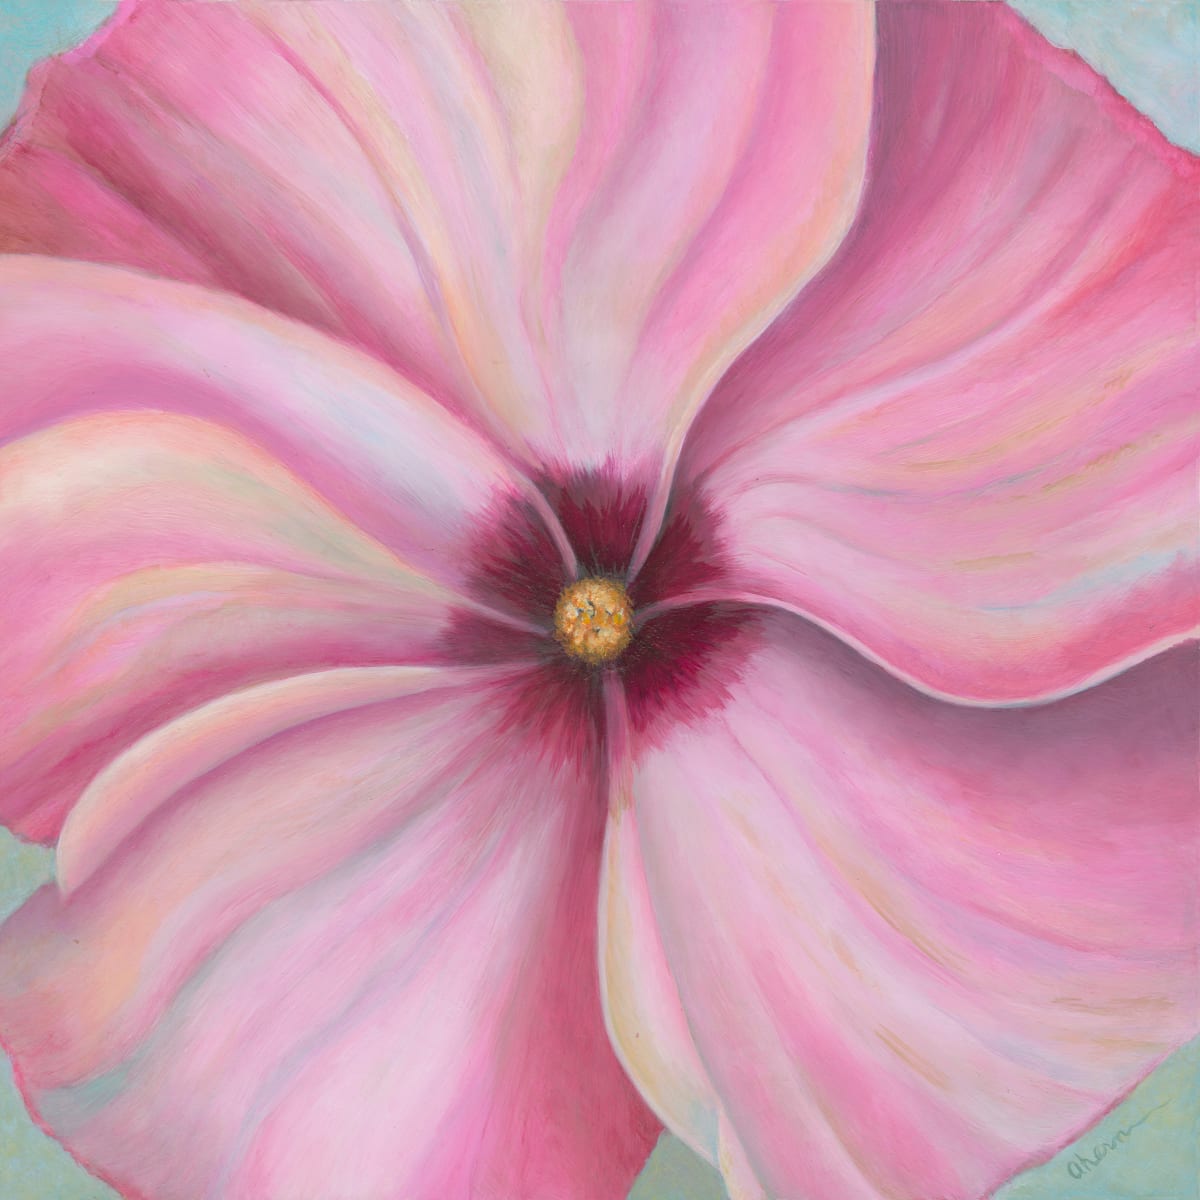 Patiently Waiting  - Cherry Hibiscus by Mary Ahern 